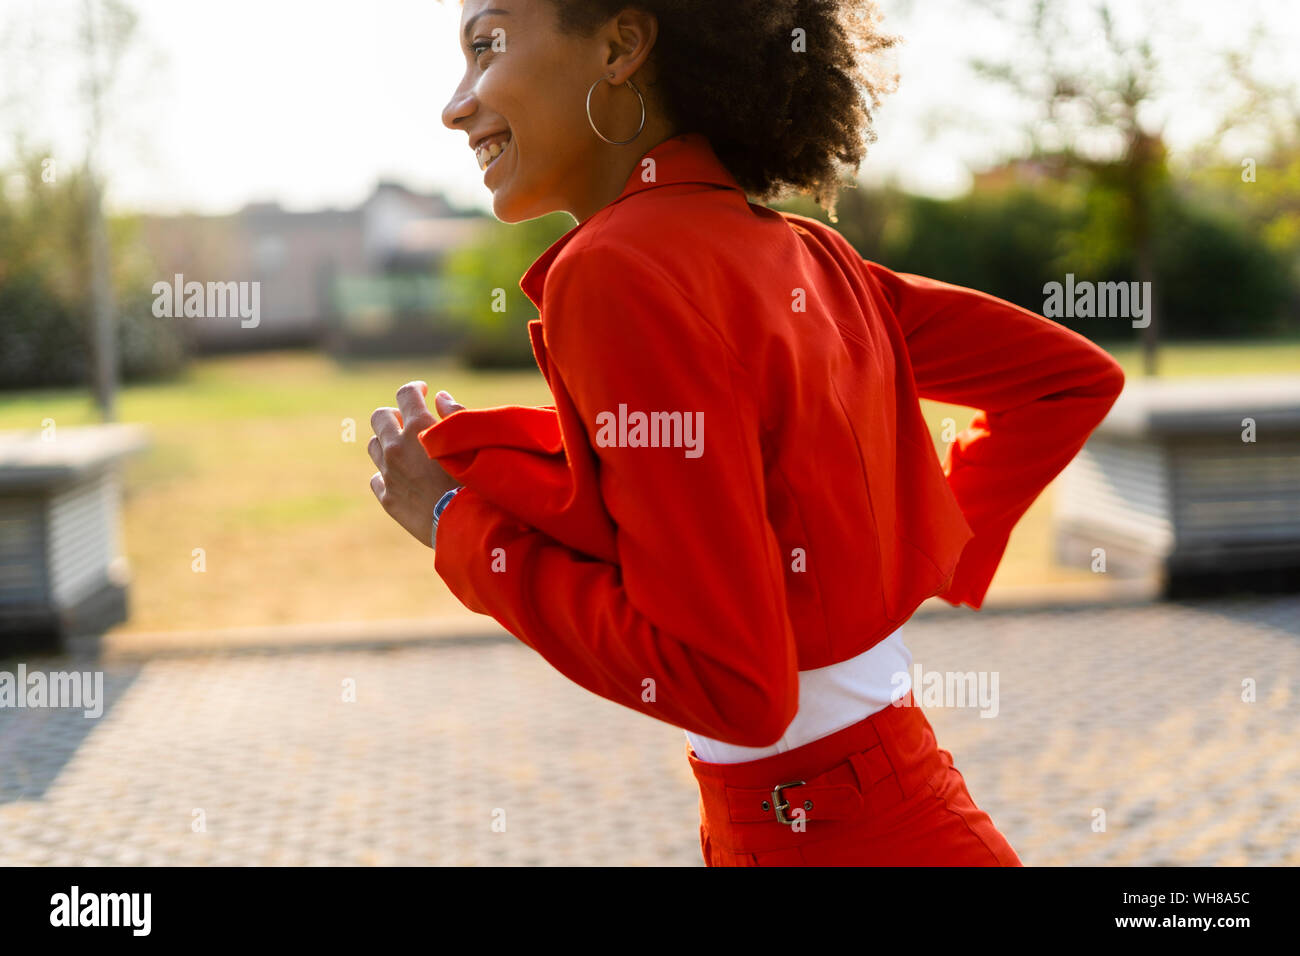 Running young woman wearing fashionable red pantsuit Stock Photo